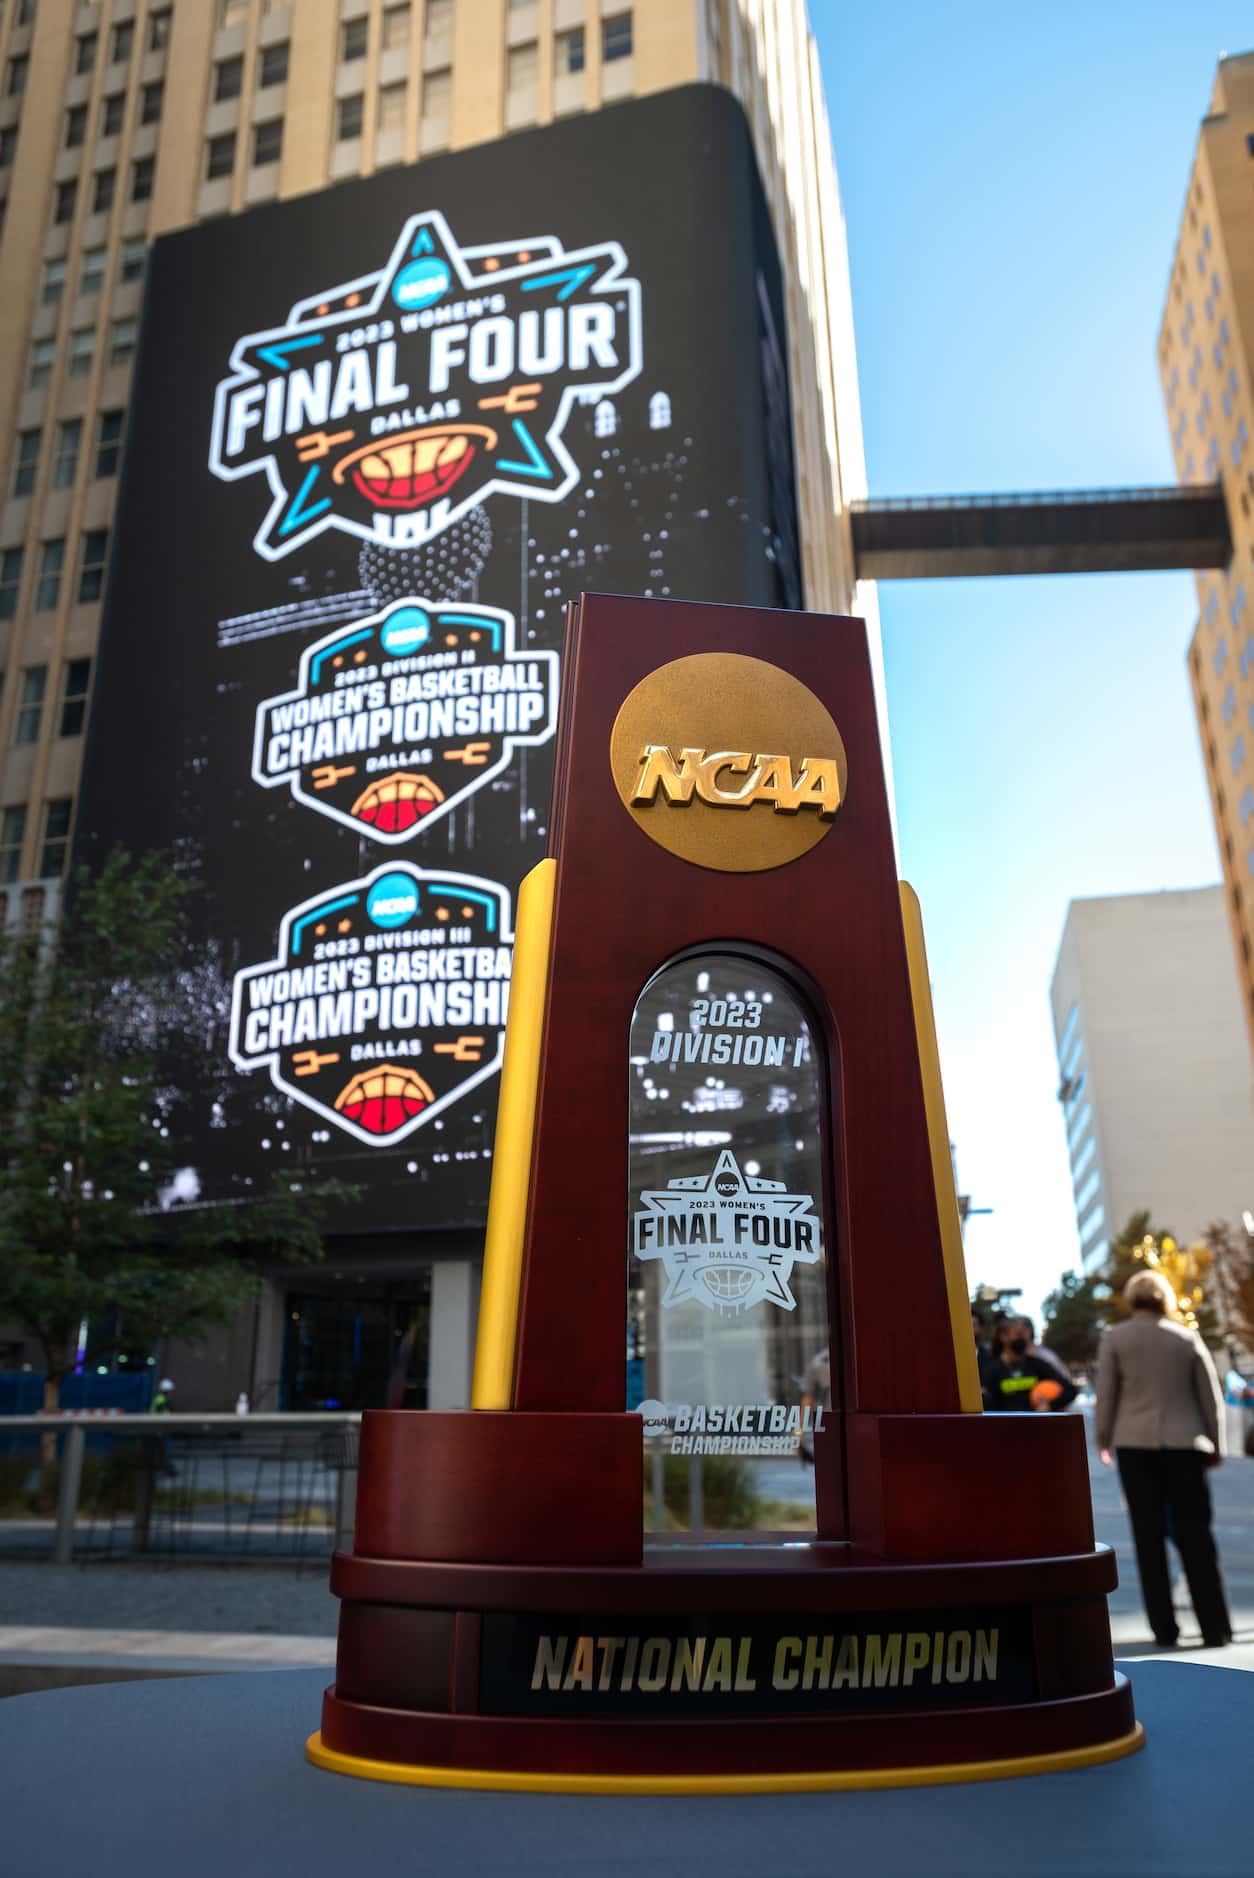 The Women's Final Four Division I Championship on display during the unveiling of the Dallas...